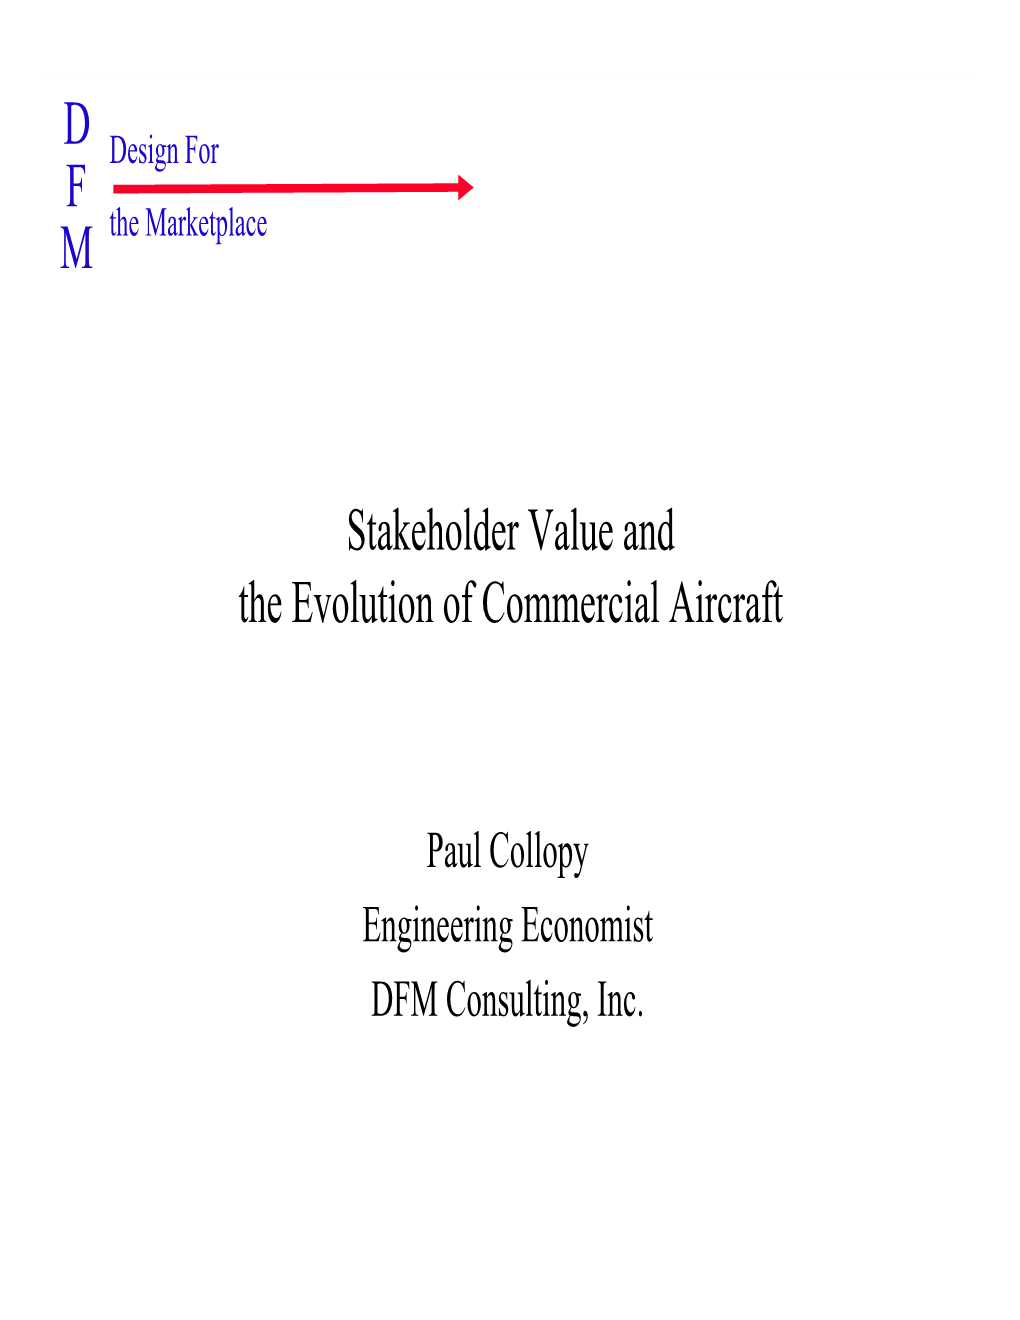 Stakeholder Value and the Evolution of Commercial Aircraft